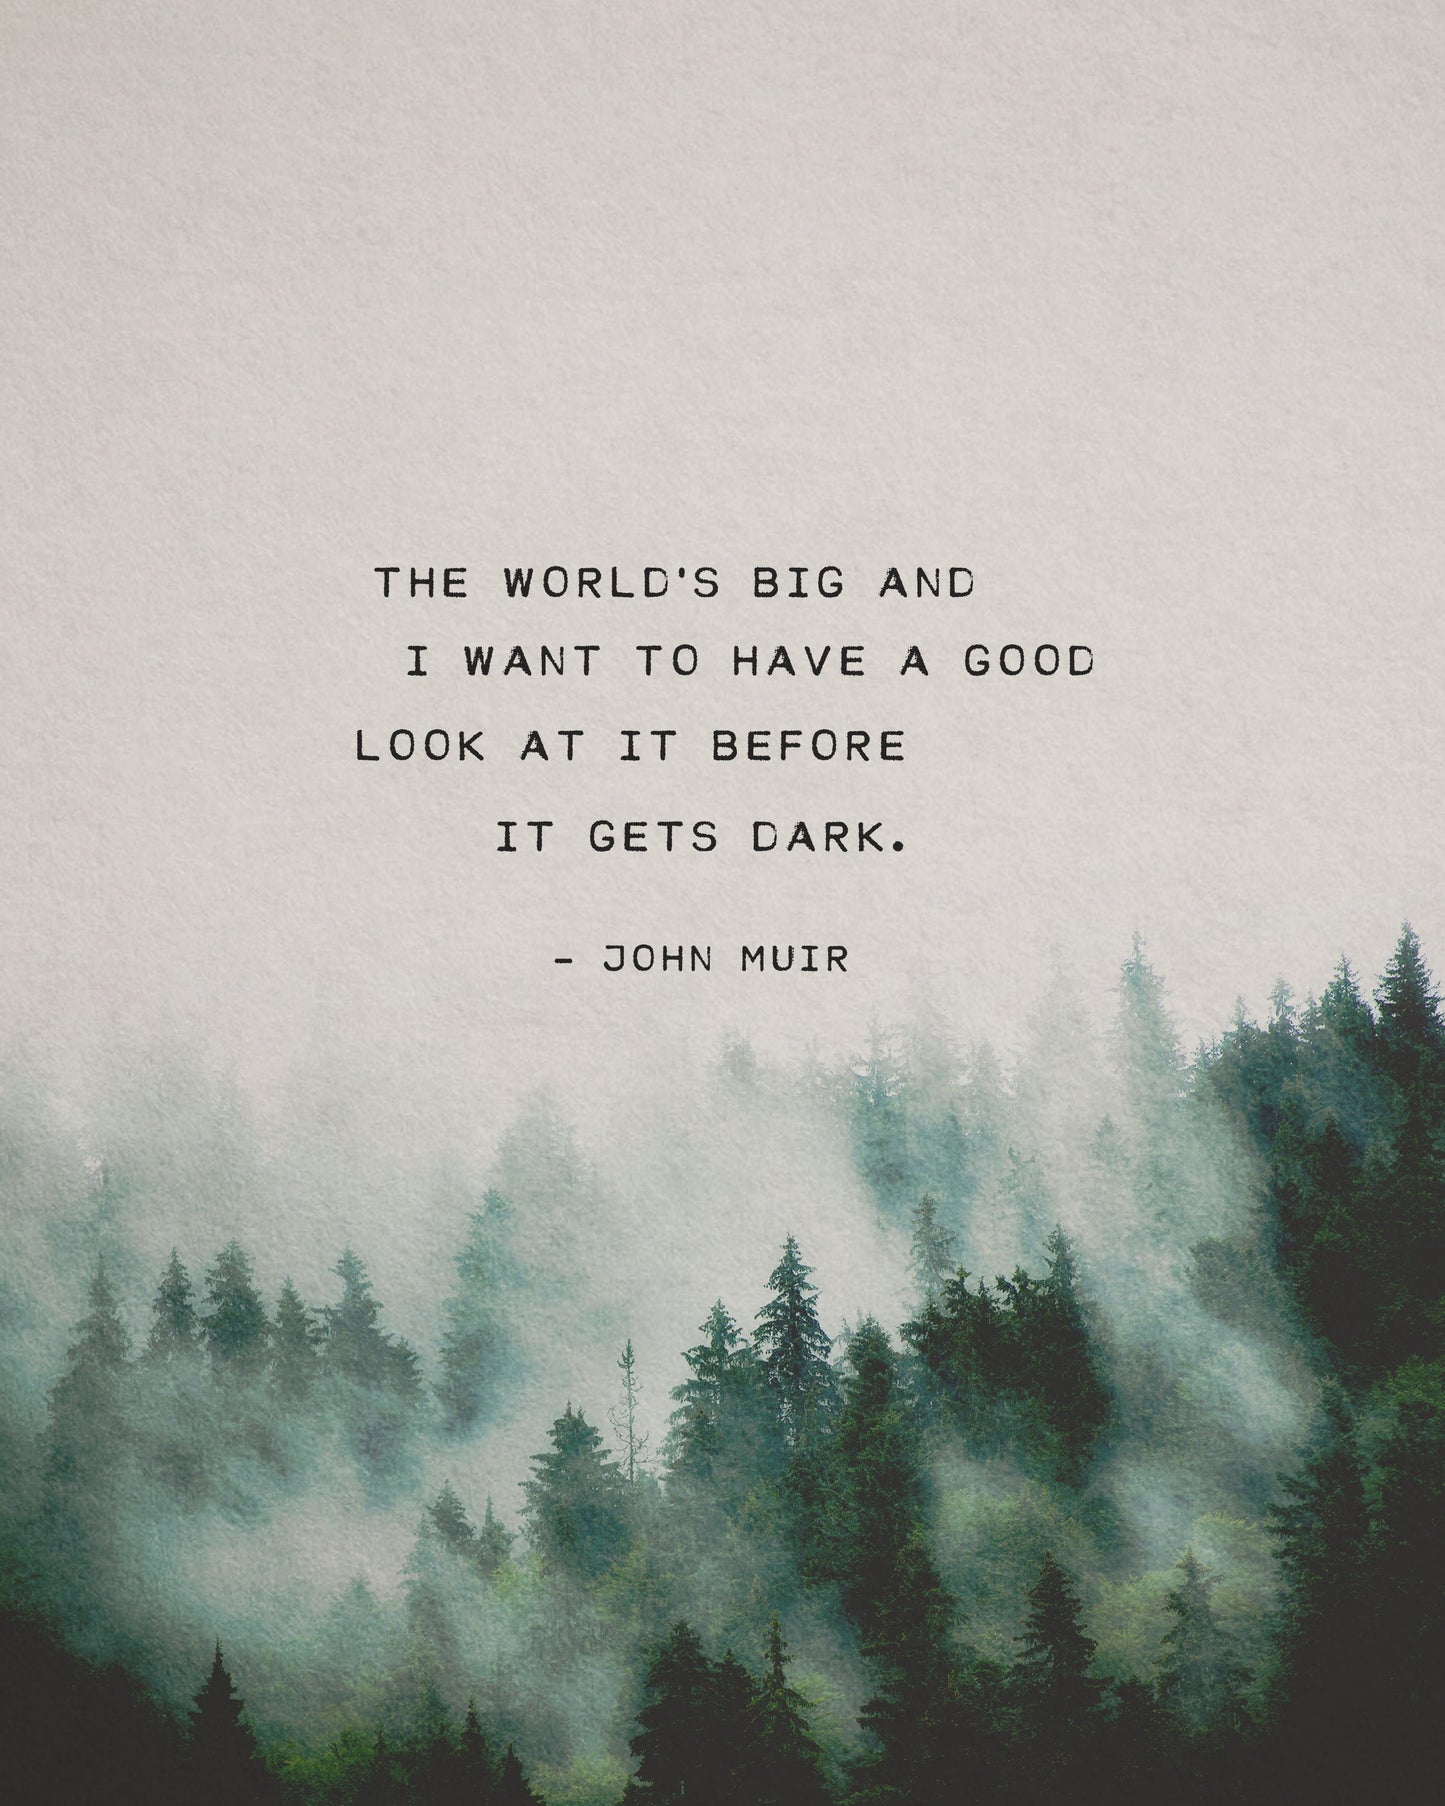 John Muir quote print "The world is big “The world's big and I want to have a good look at it before it gets dark.” Nature art print